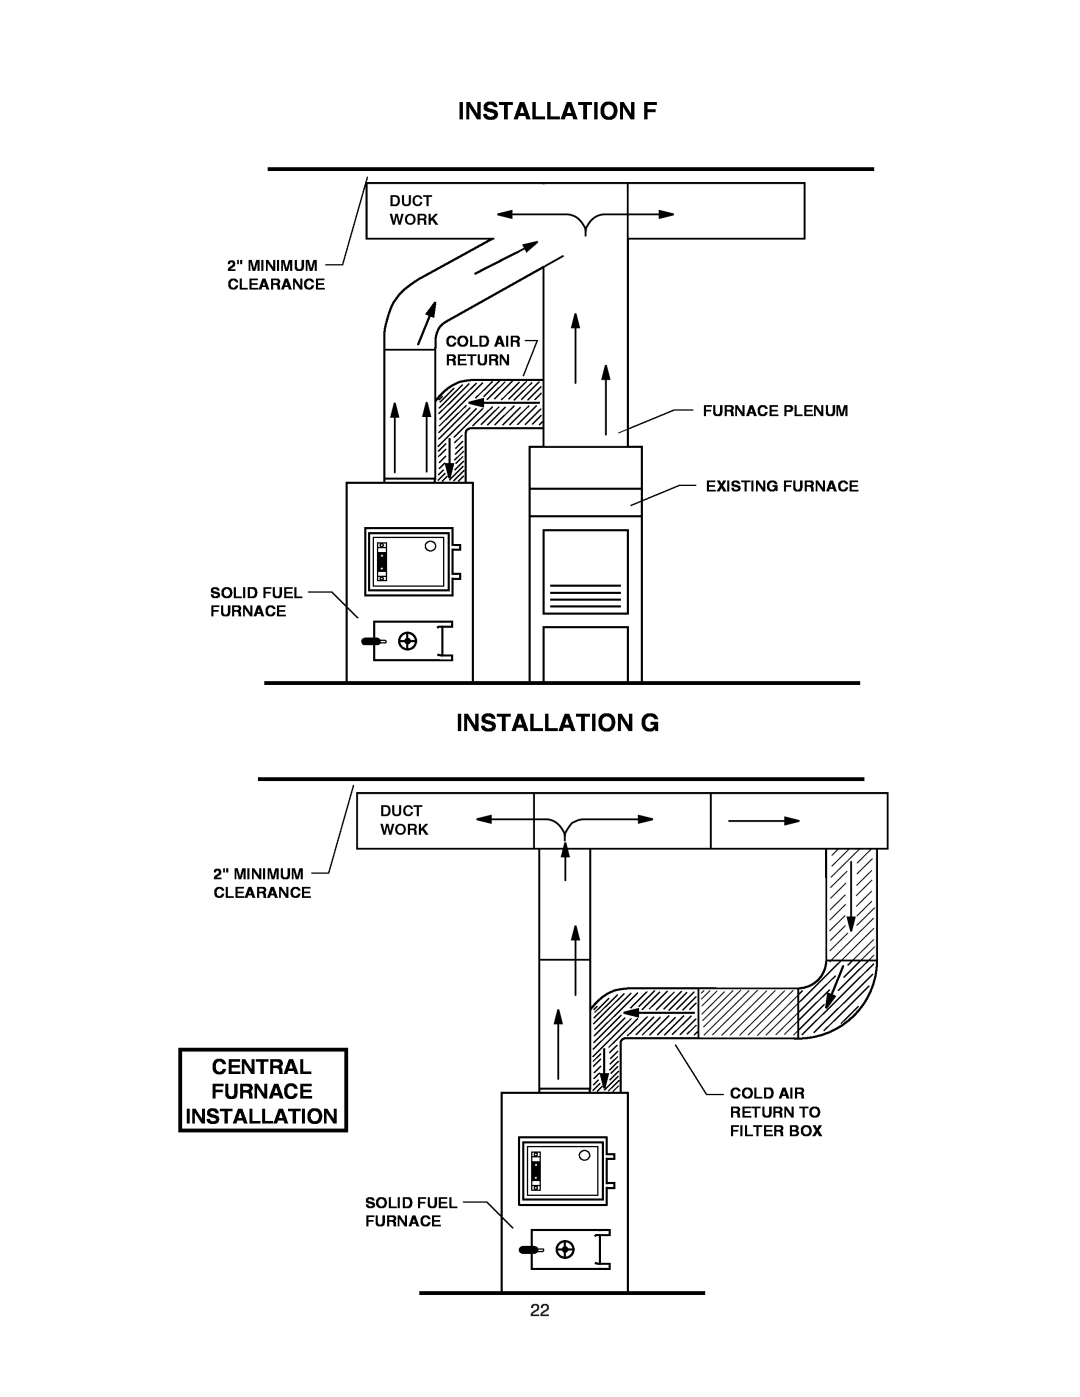 United States Stove 1500 owner manual Installation F, Installation G, Central, Furnace Installation 